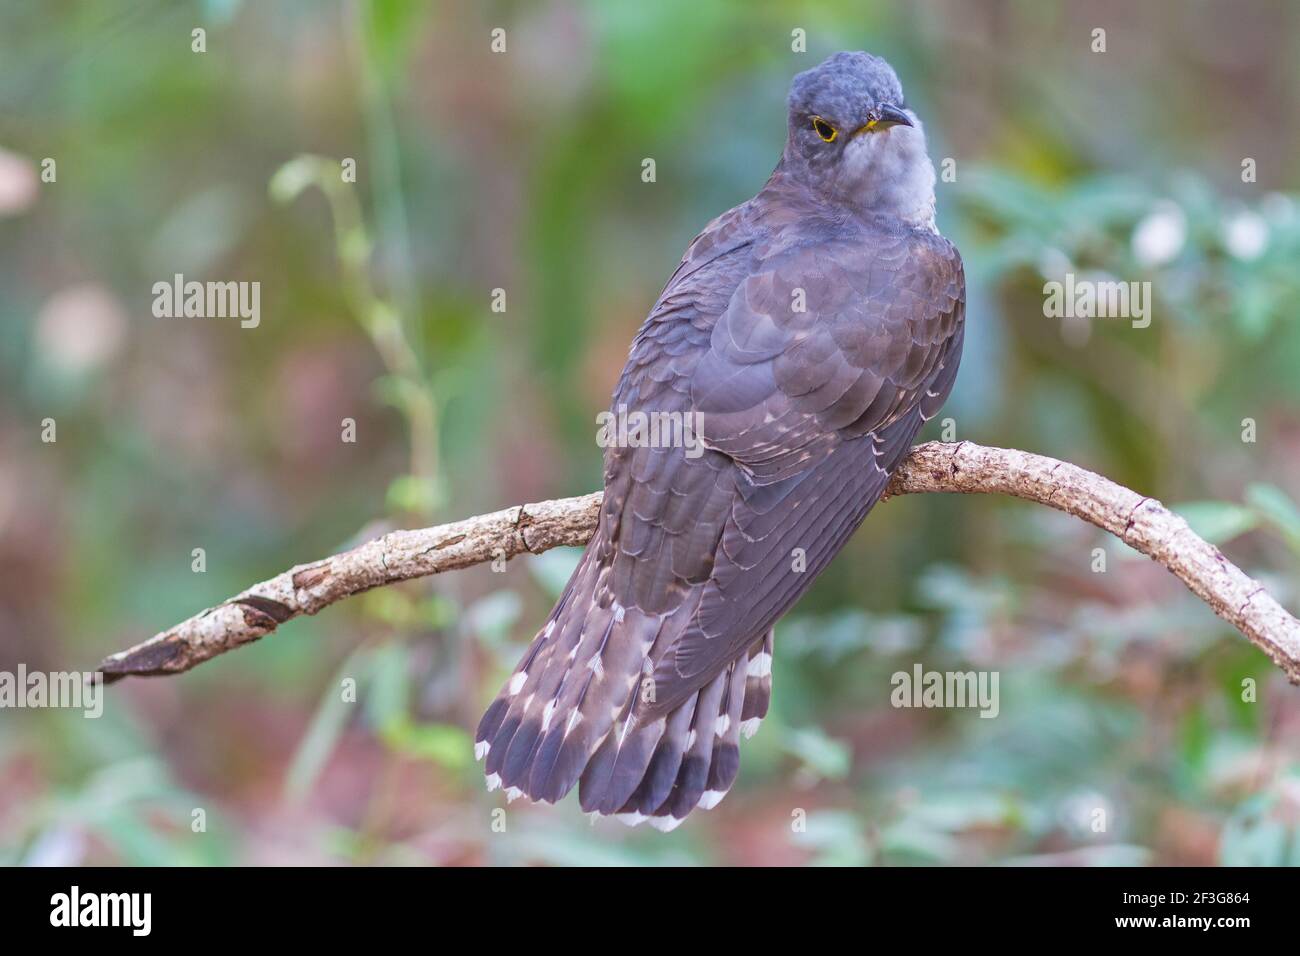 Beautiful of smallest Cuckoo bird and very rare , Indian Cuckoo (Cuculus micropterus),  standing on  branch showing it back profile    in nature of Th Stock Photo